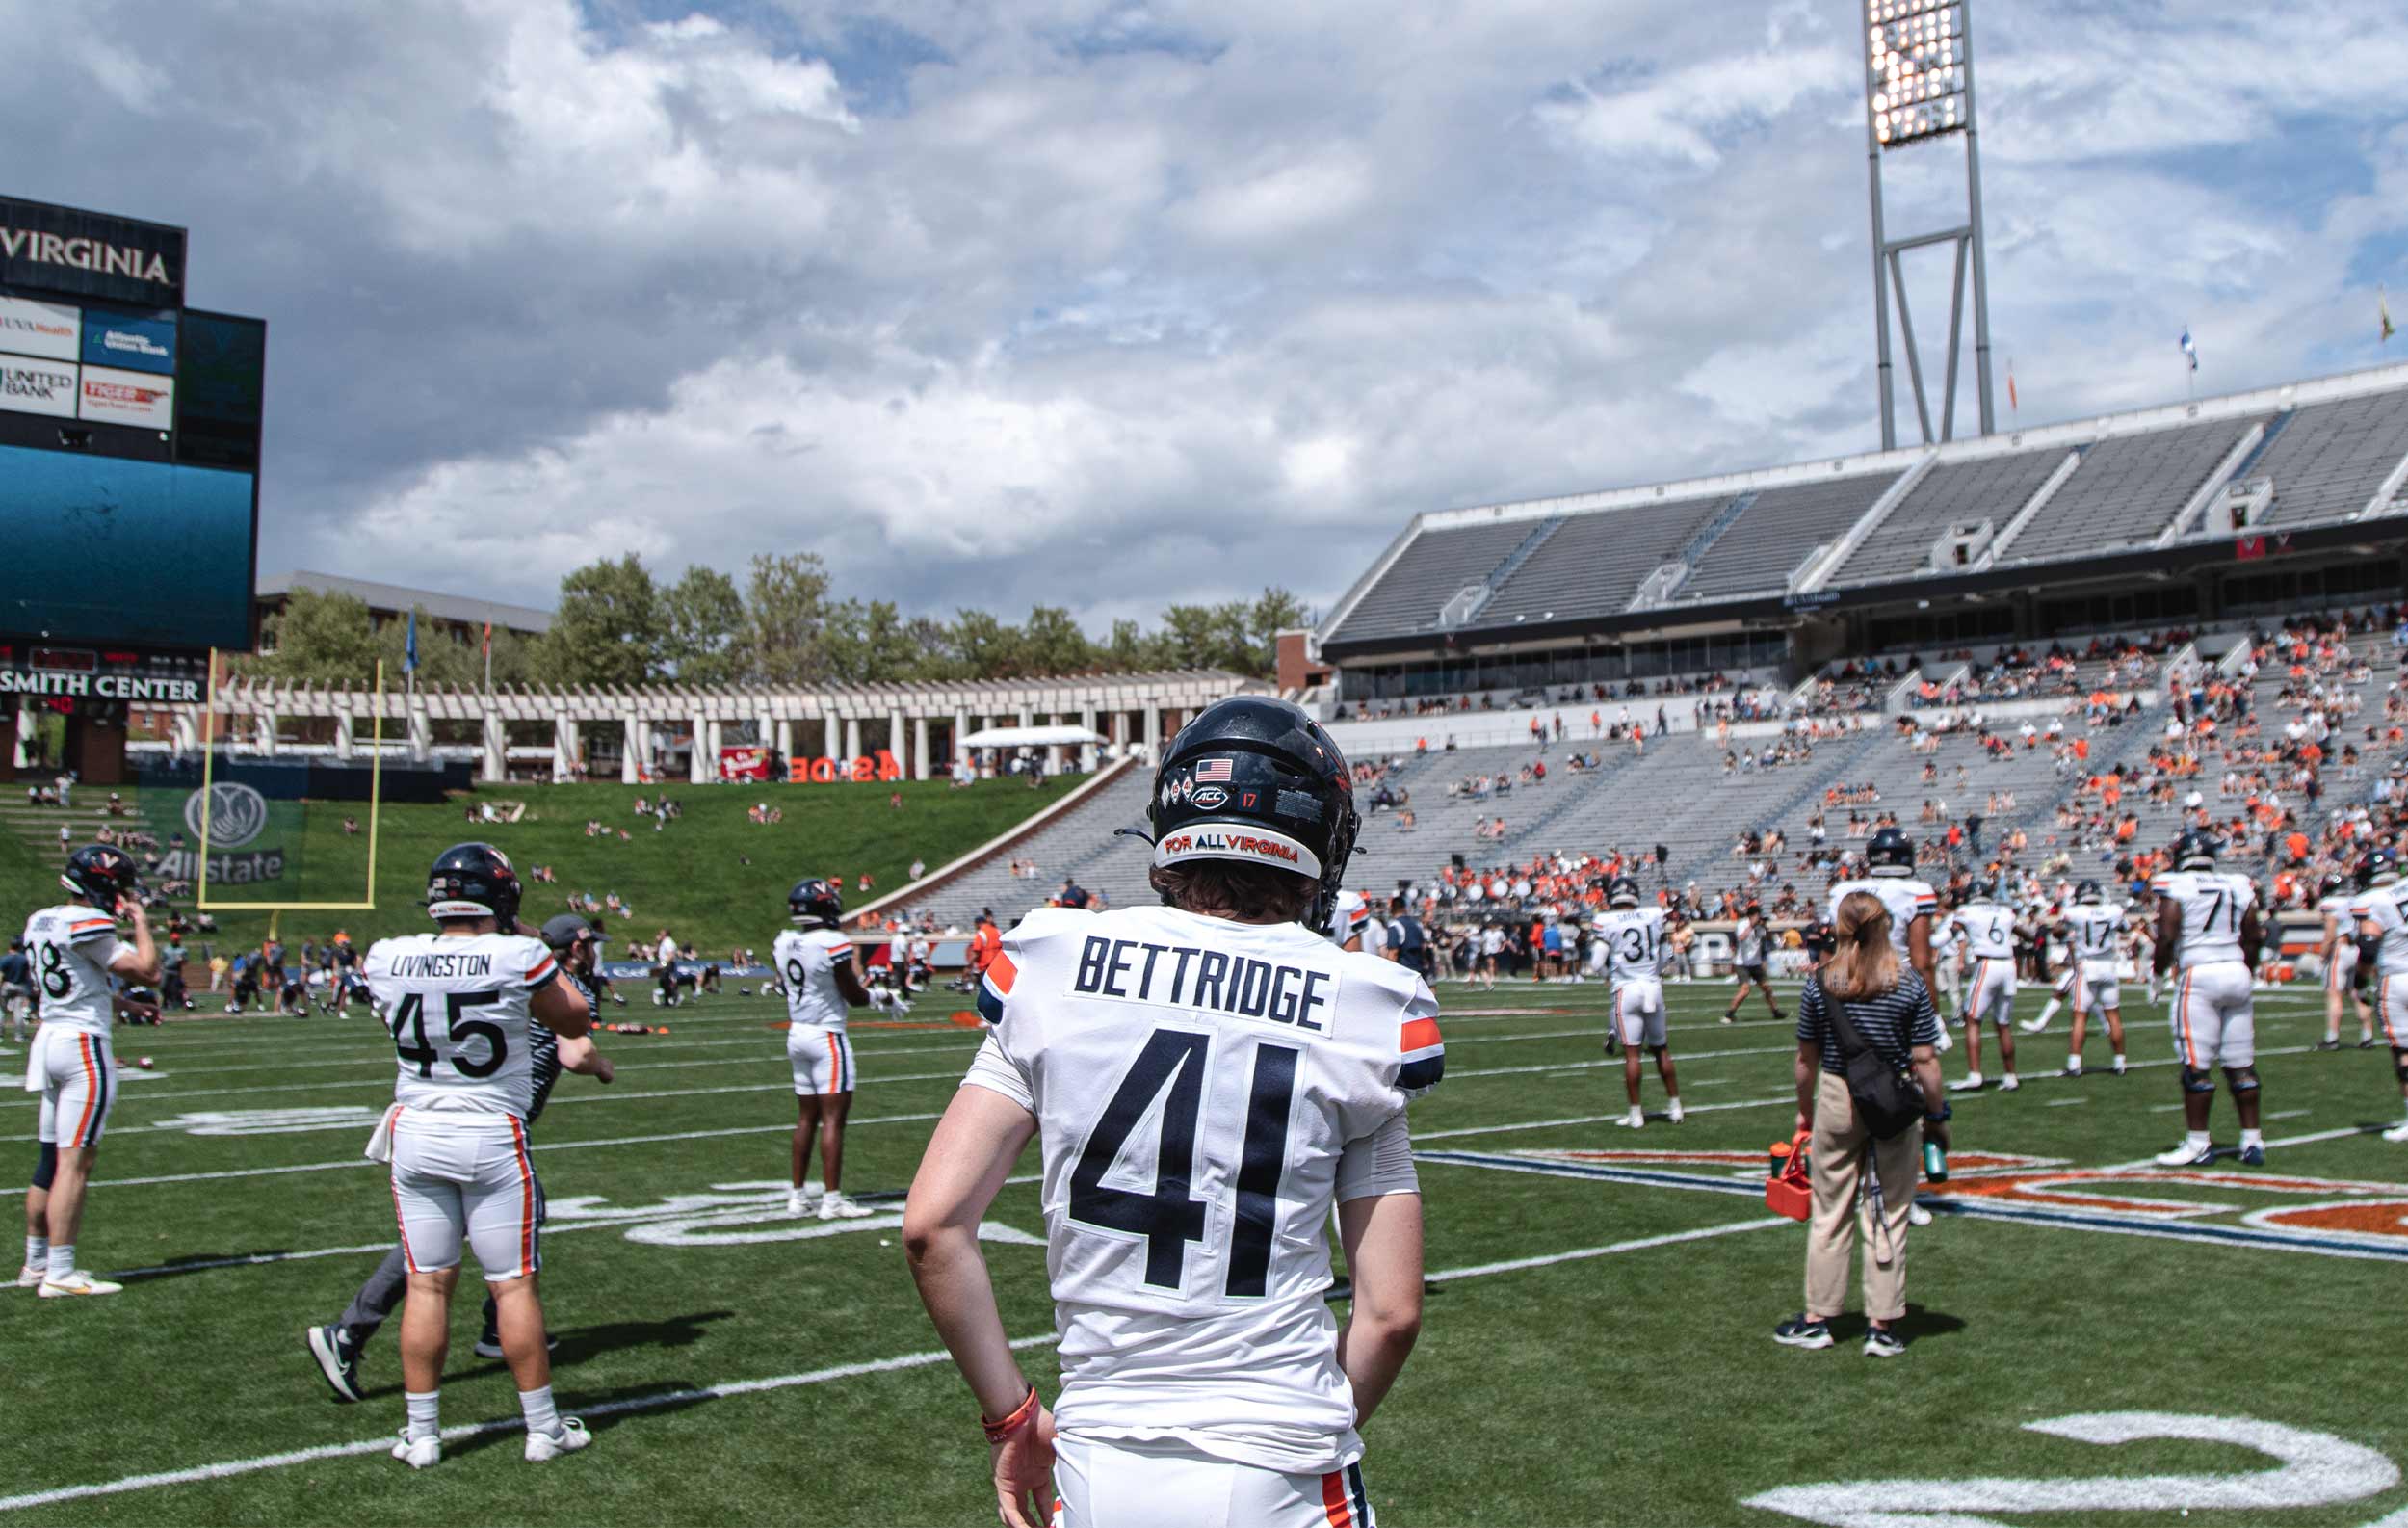 Will Bettridge taking the field wearing his new number, 41